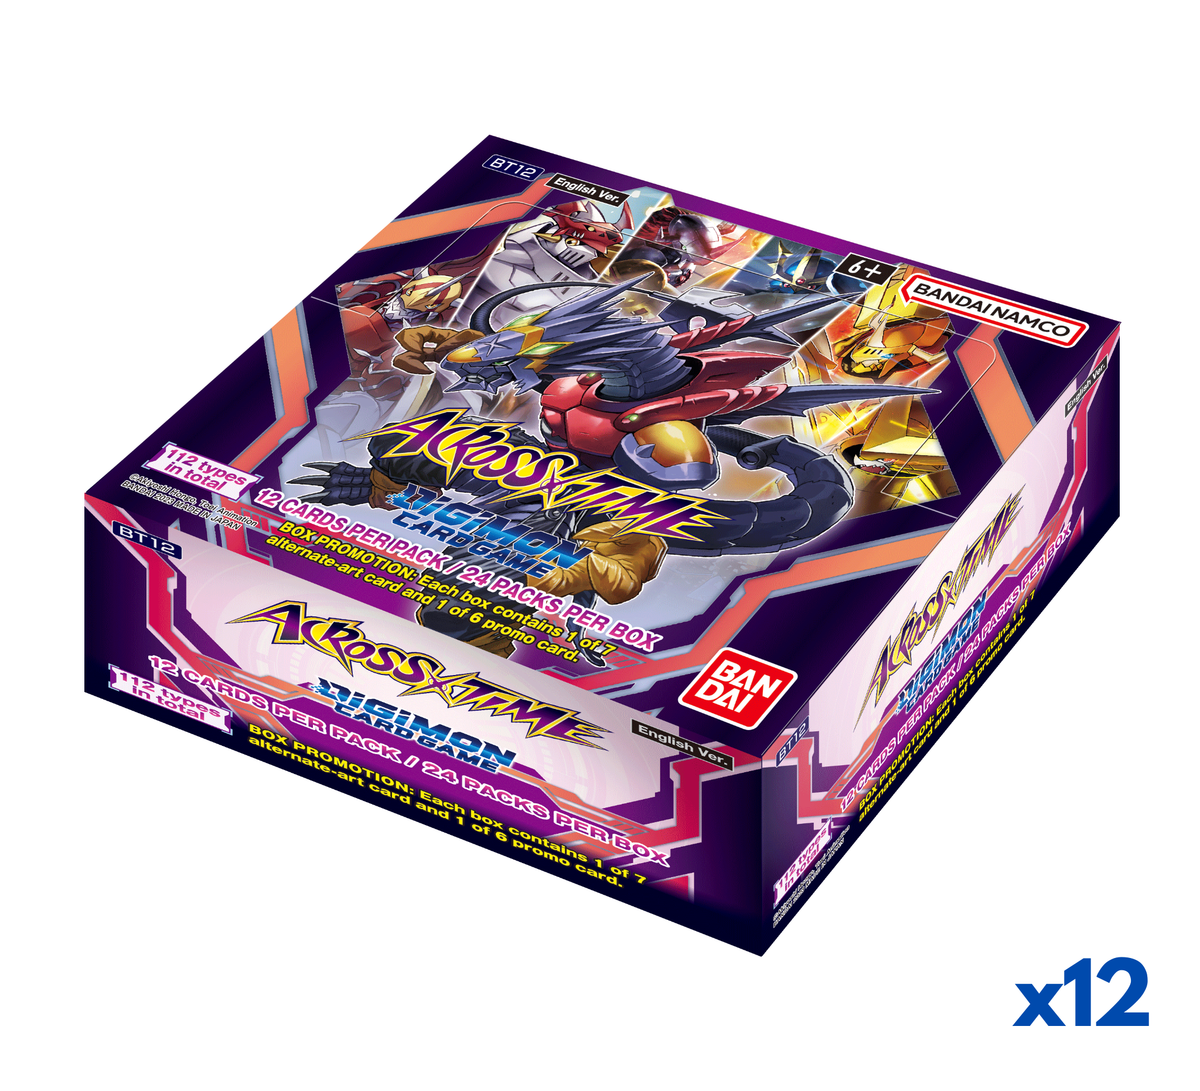 Digimon Card Game Across Time BT12 Booster Case